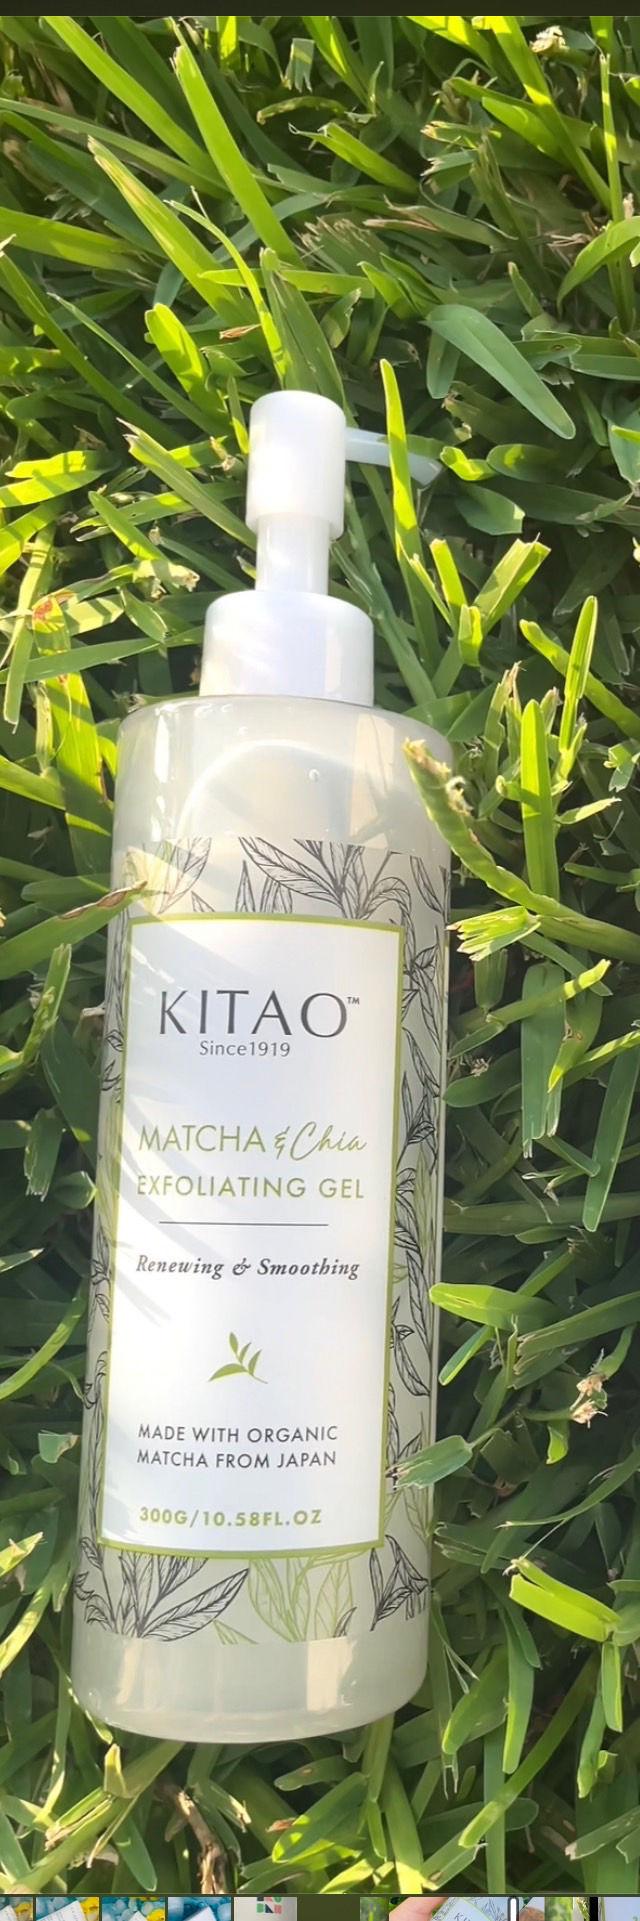 Matcha & Chia Exfoliating Gel product review